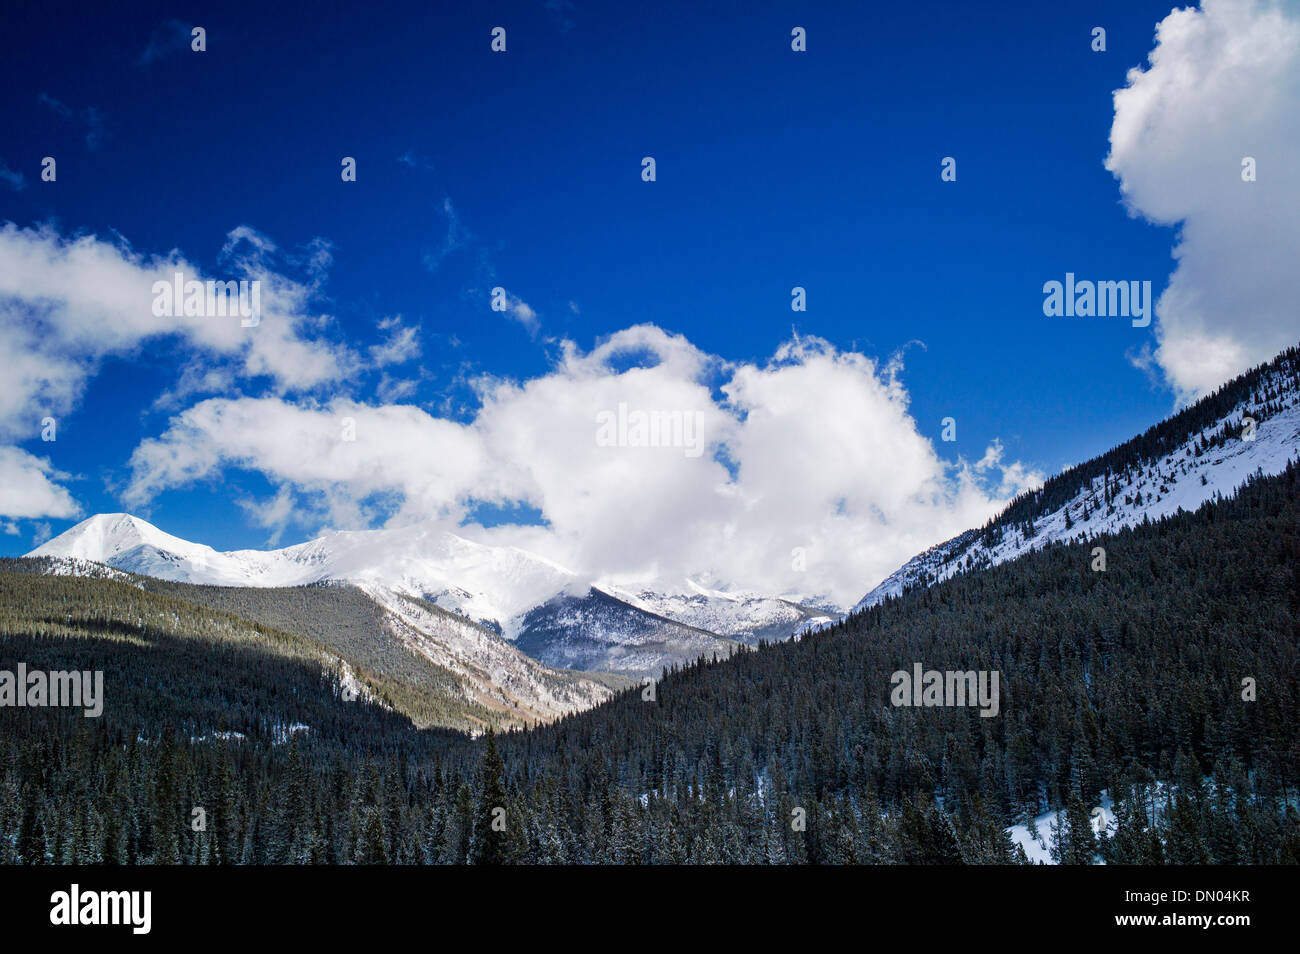 Winter view of the Sawatch Range from the top of Monarch Mountain, Colorado, USA Stock Photo